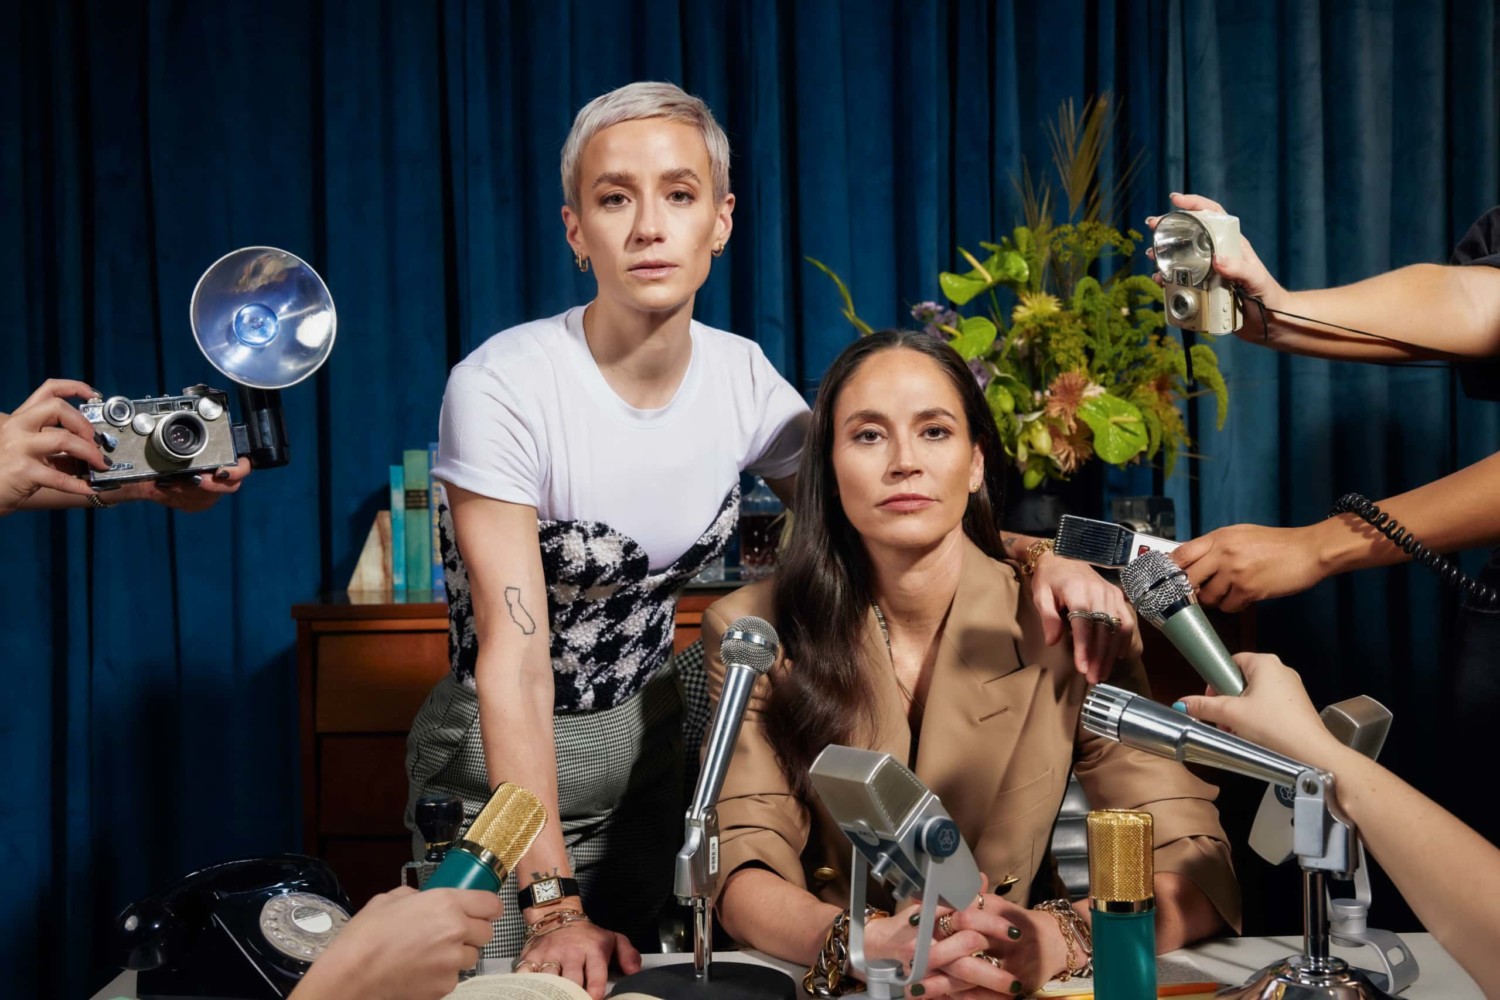 American sports stars Megan Rapinoe and Sue Bird pose for photos in front of microphone